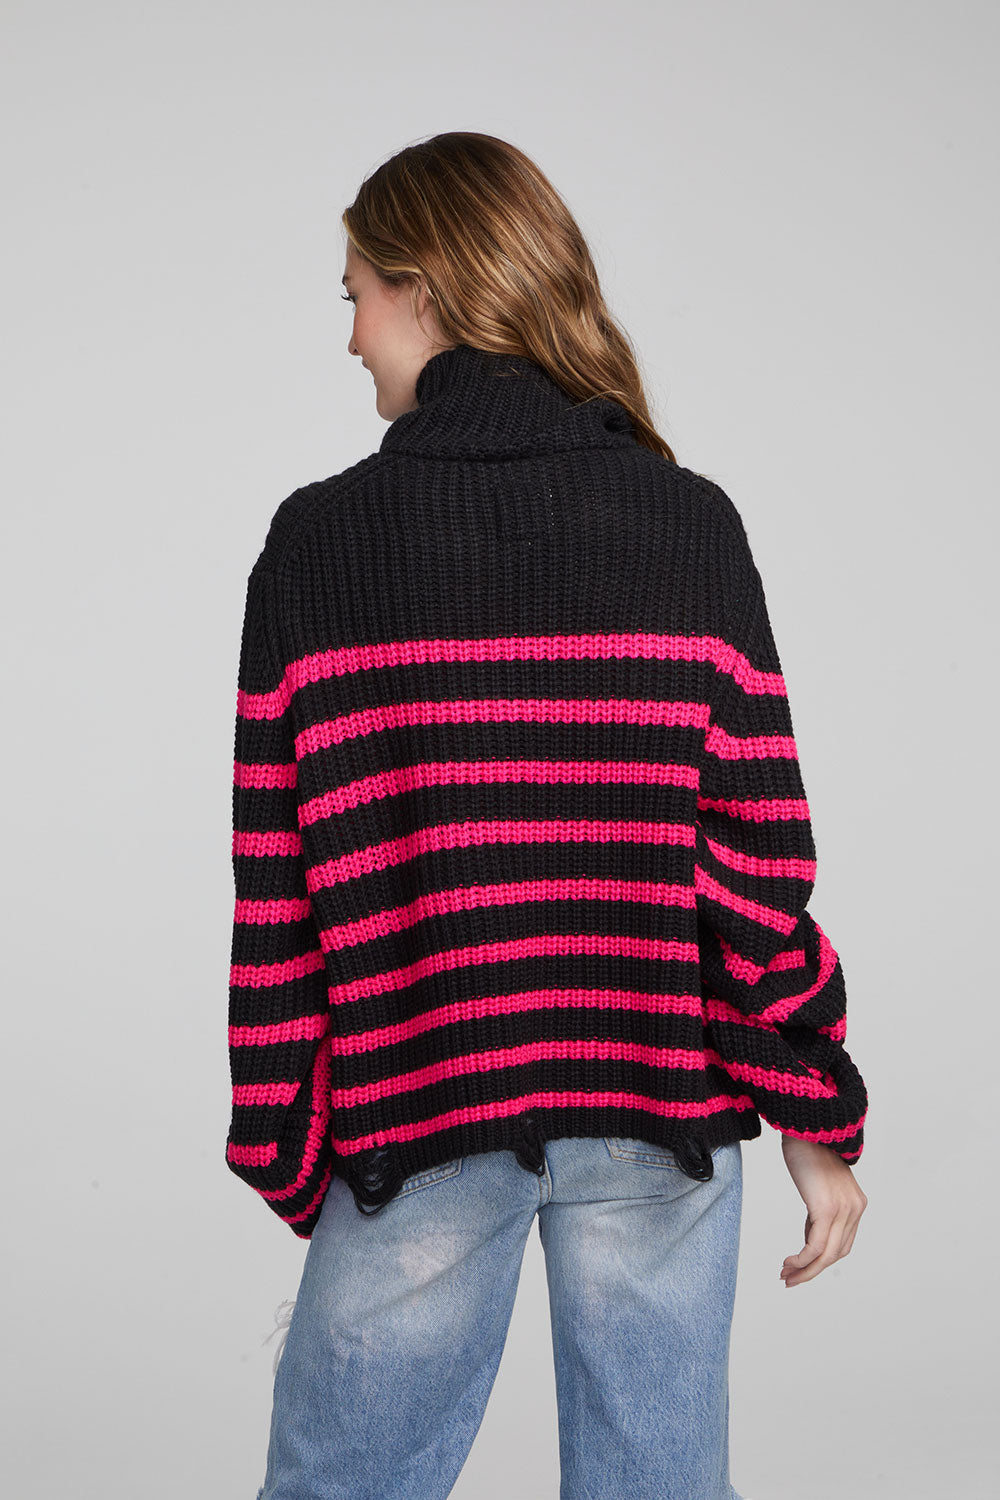 Aimee Melrose Stripe Pullover WOMENS chaserbrand